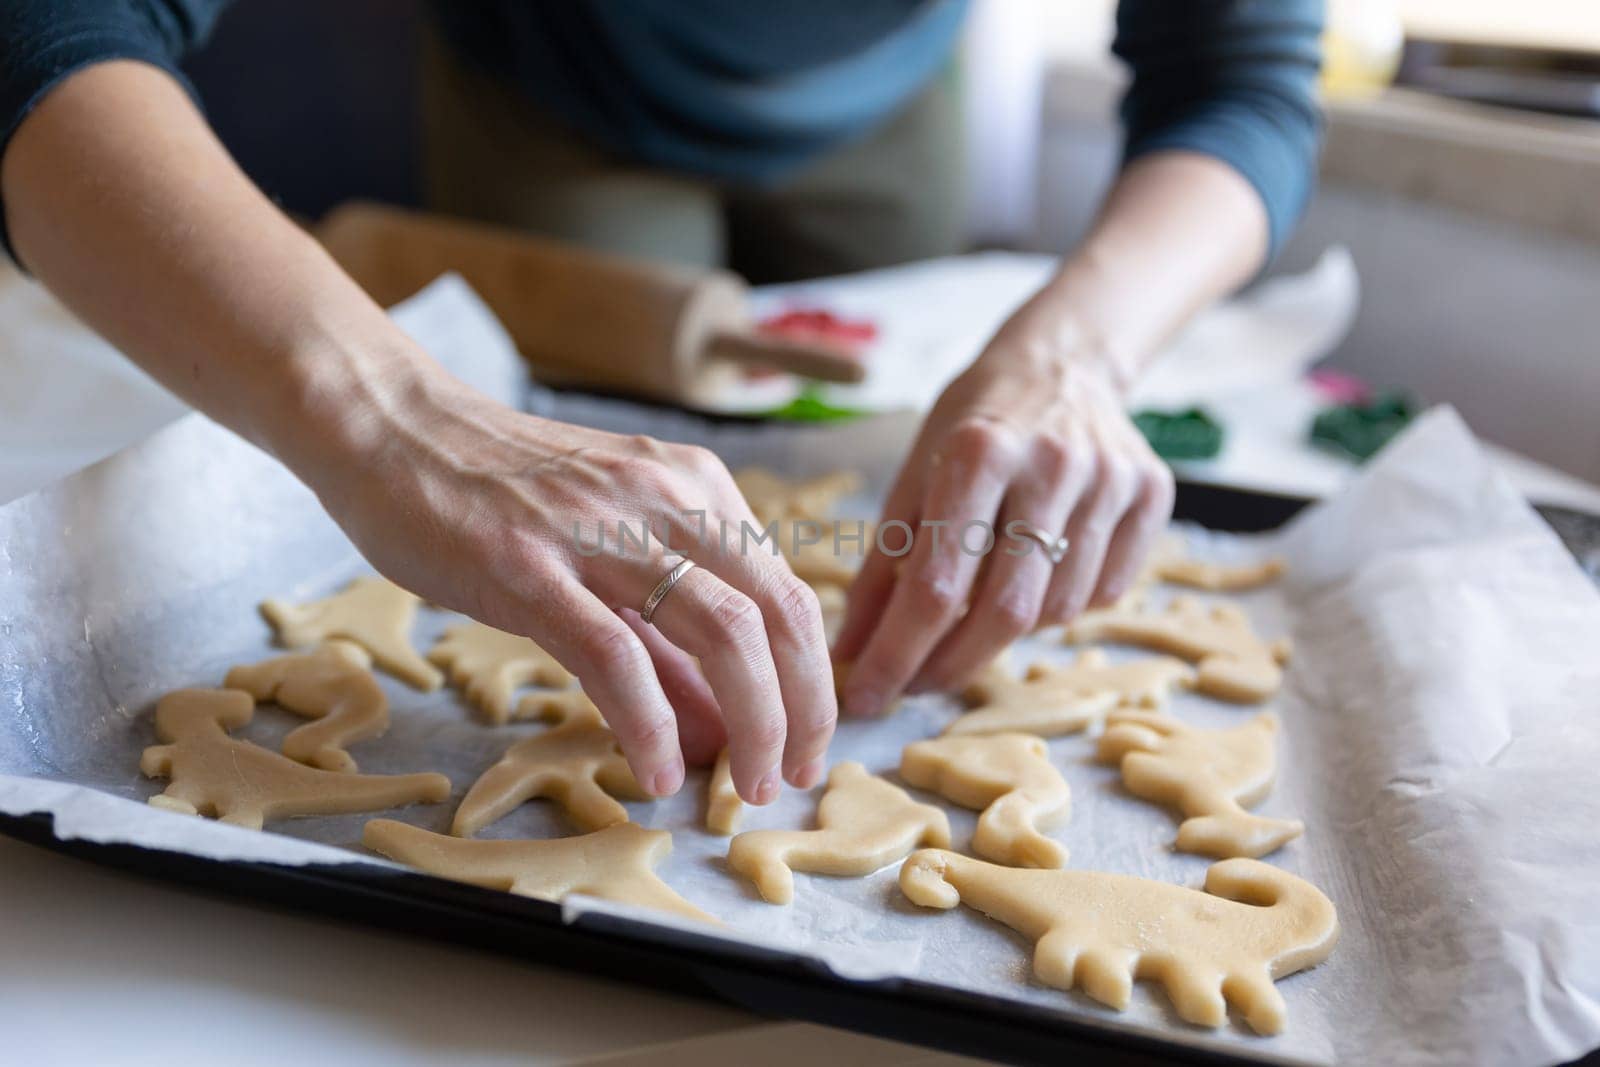 Baking cookies - a woman lays out raw dough in the shape of dinosaurs on a baking sheet. Mid shot